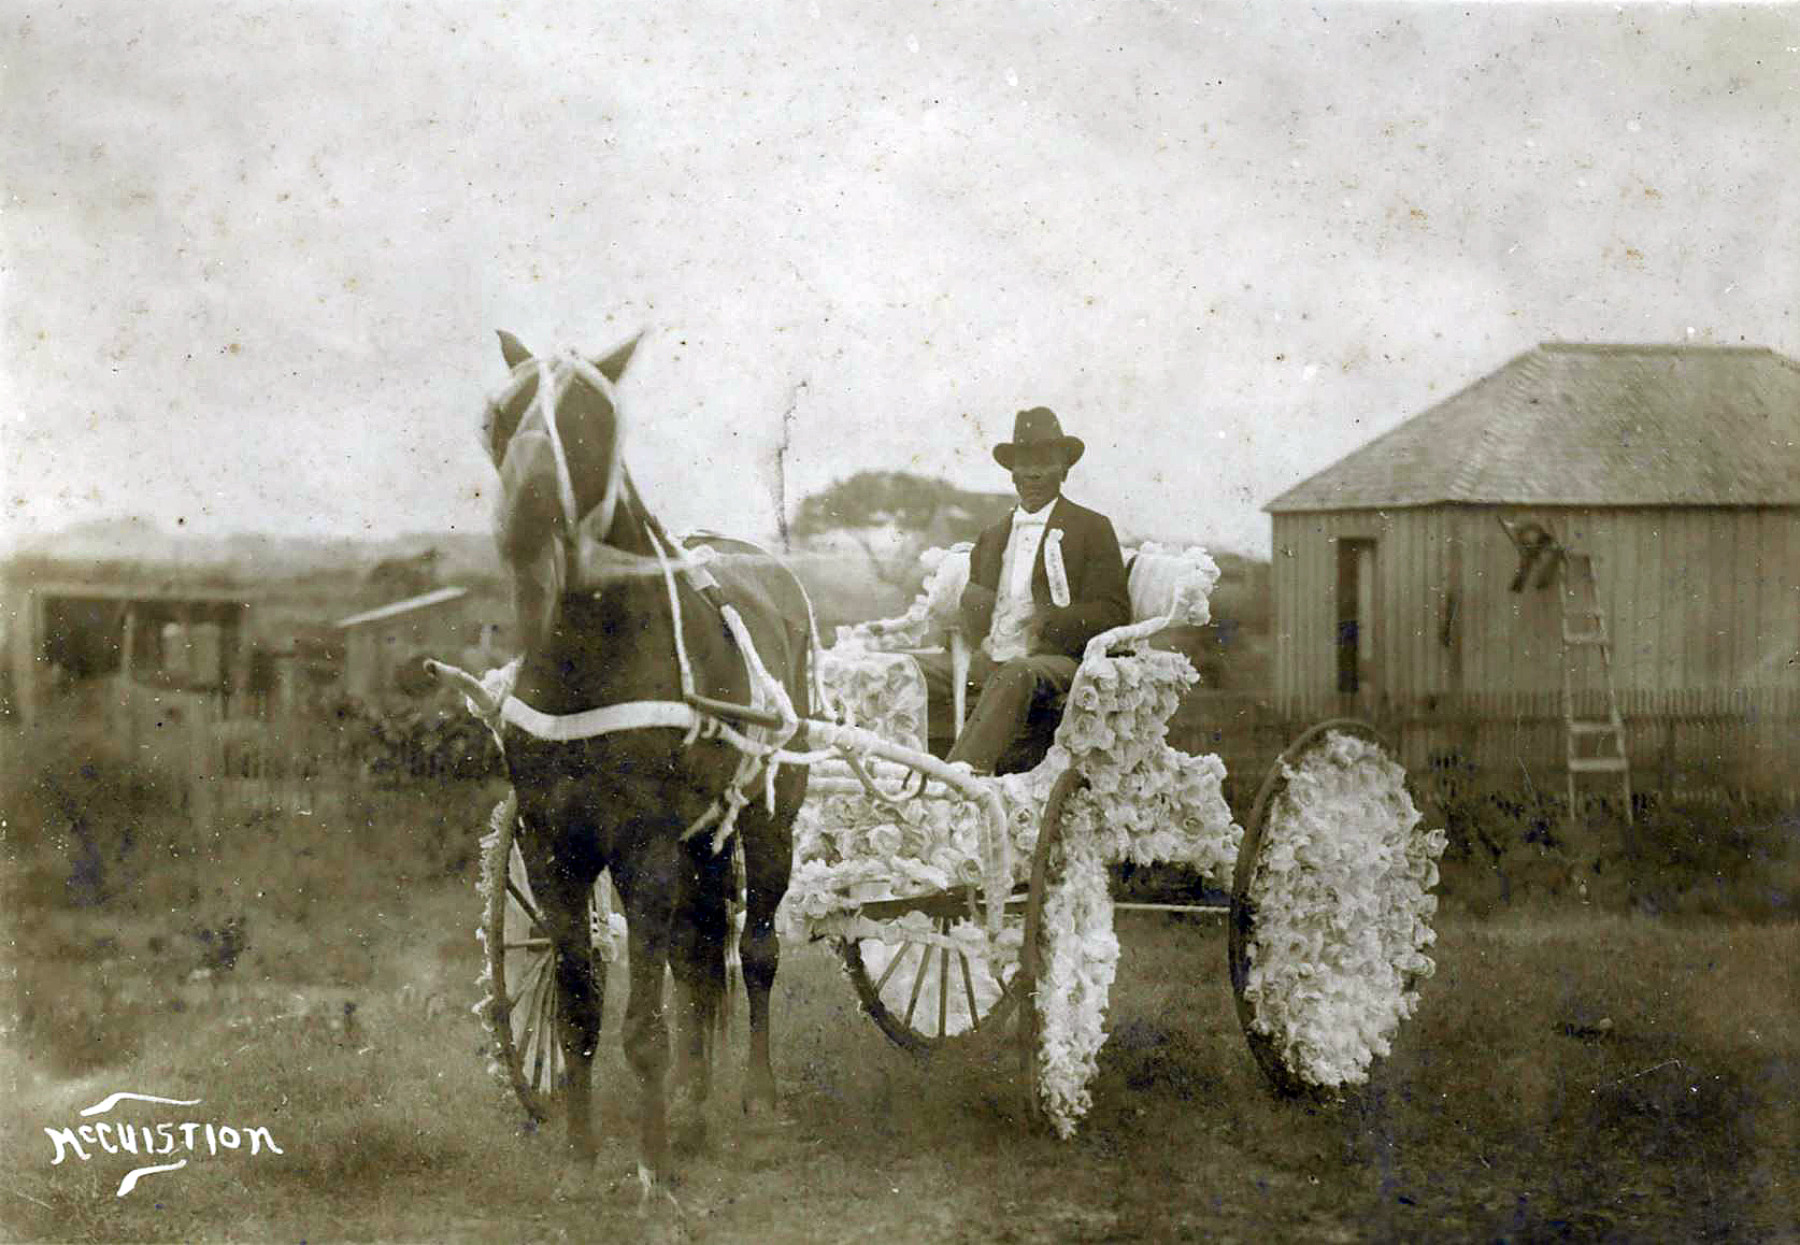 A man in a suit and hat sits in a decorated horse carriage behind a horse in a vintage photograph